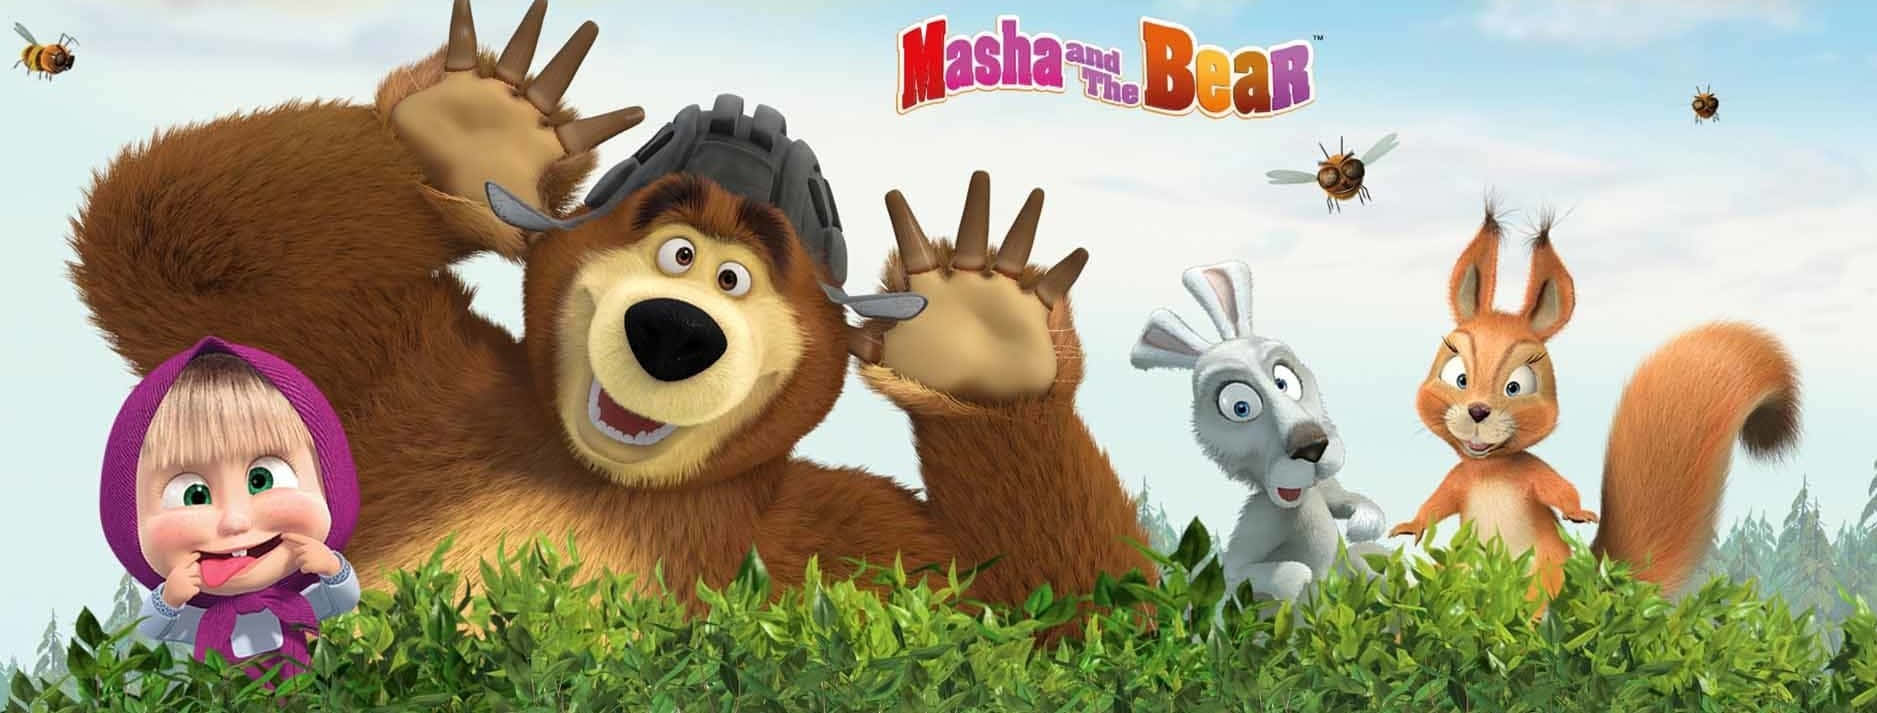 Masha and the Bear enjoying a fun-filled moment in the forest